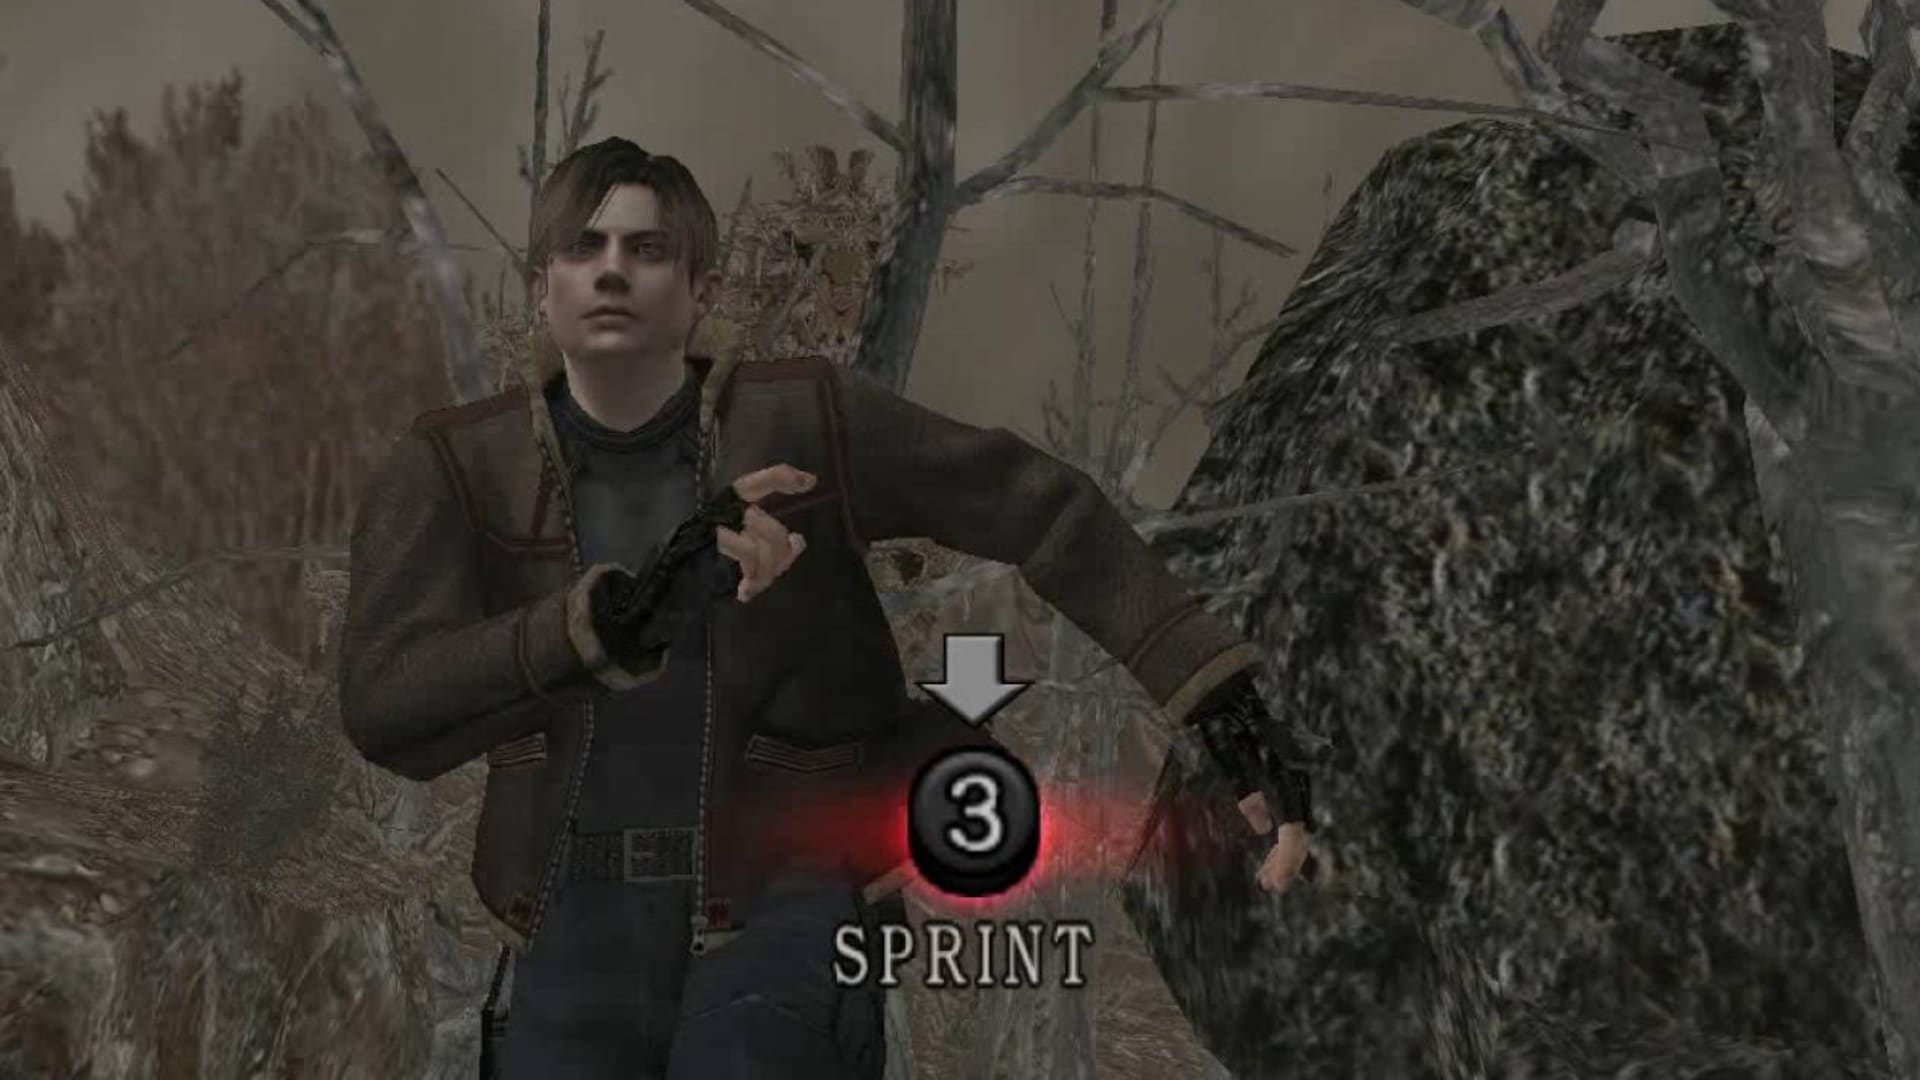 Resident Evil 4 Ditman Glitch Returns in Remake in the Form of a Homage